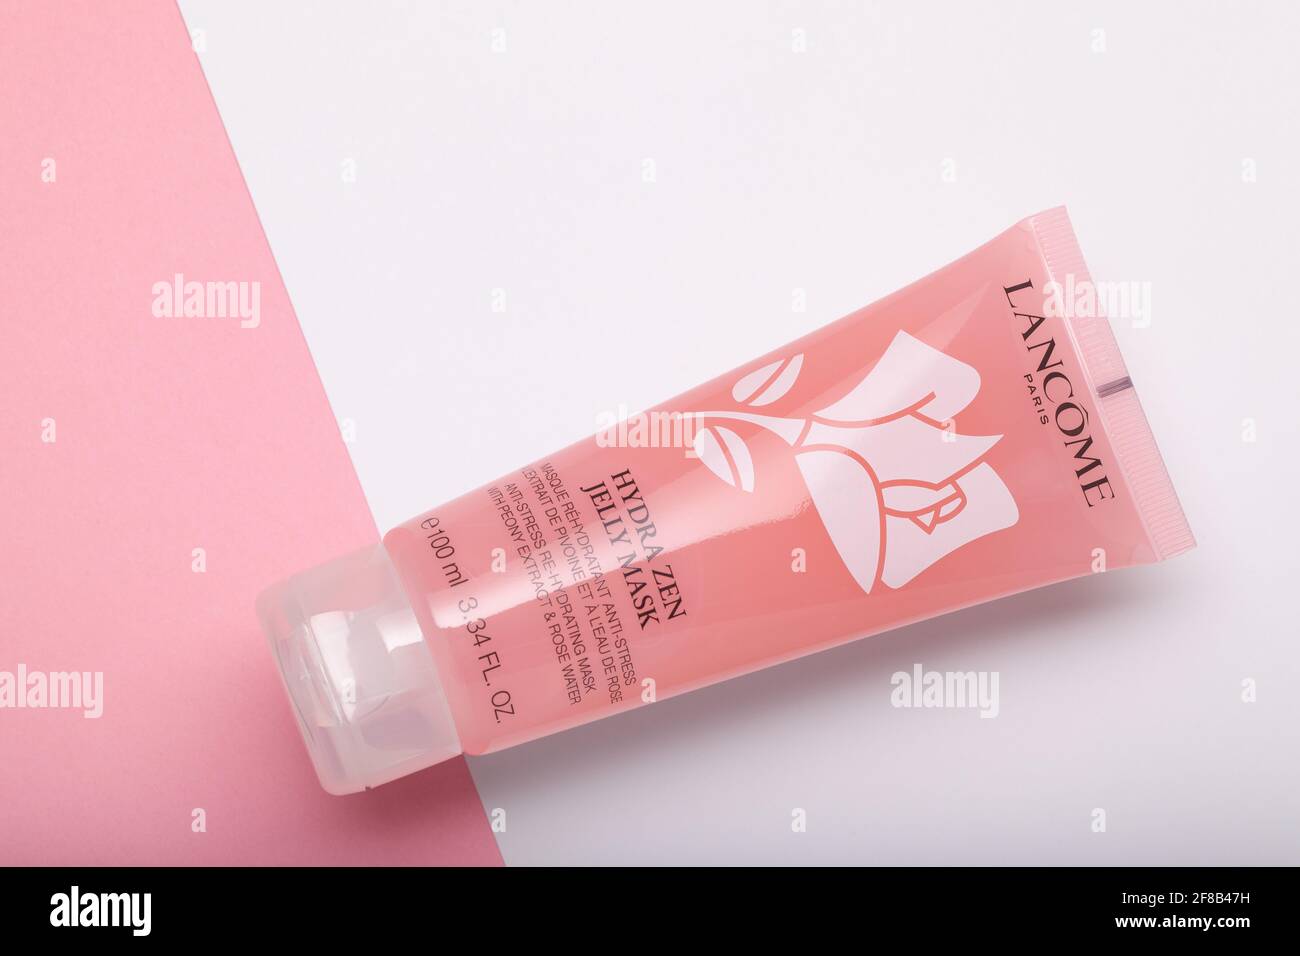 Sterkte Sympathiek Groot Prague,Czech Republic - 23 February 2021: Lancome Hydra Zen Jelly Mask on  the pink and white background. Lancome is a French luxury perfumes and cos  Stock Photo - Alamy